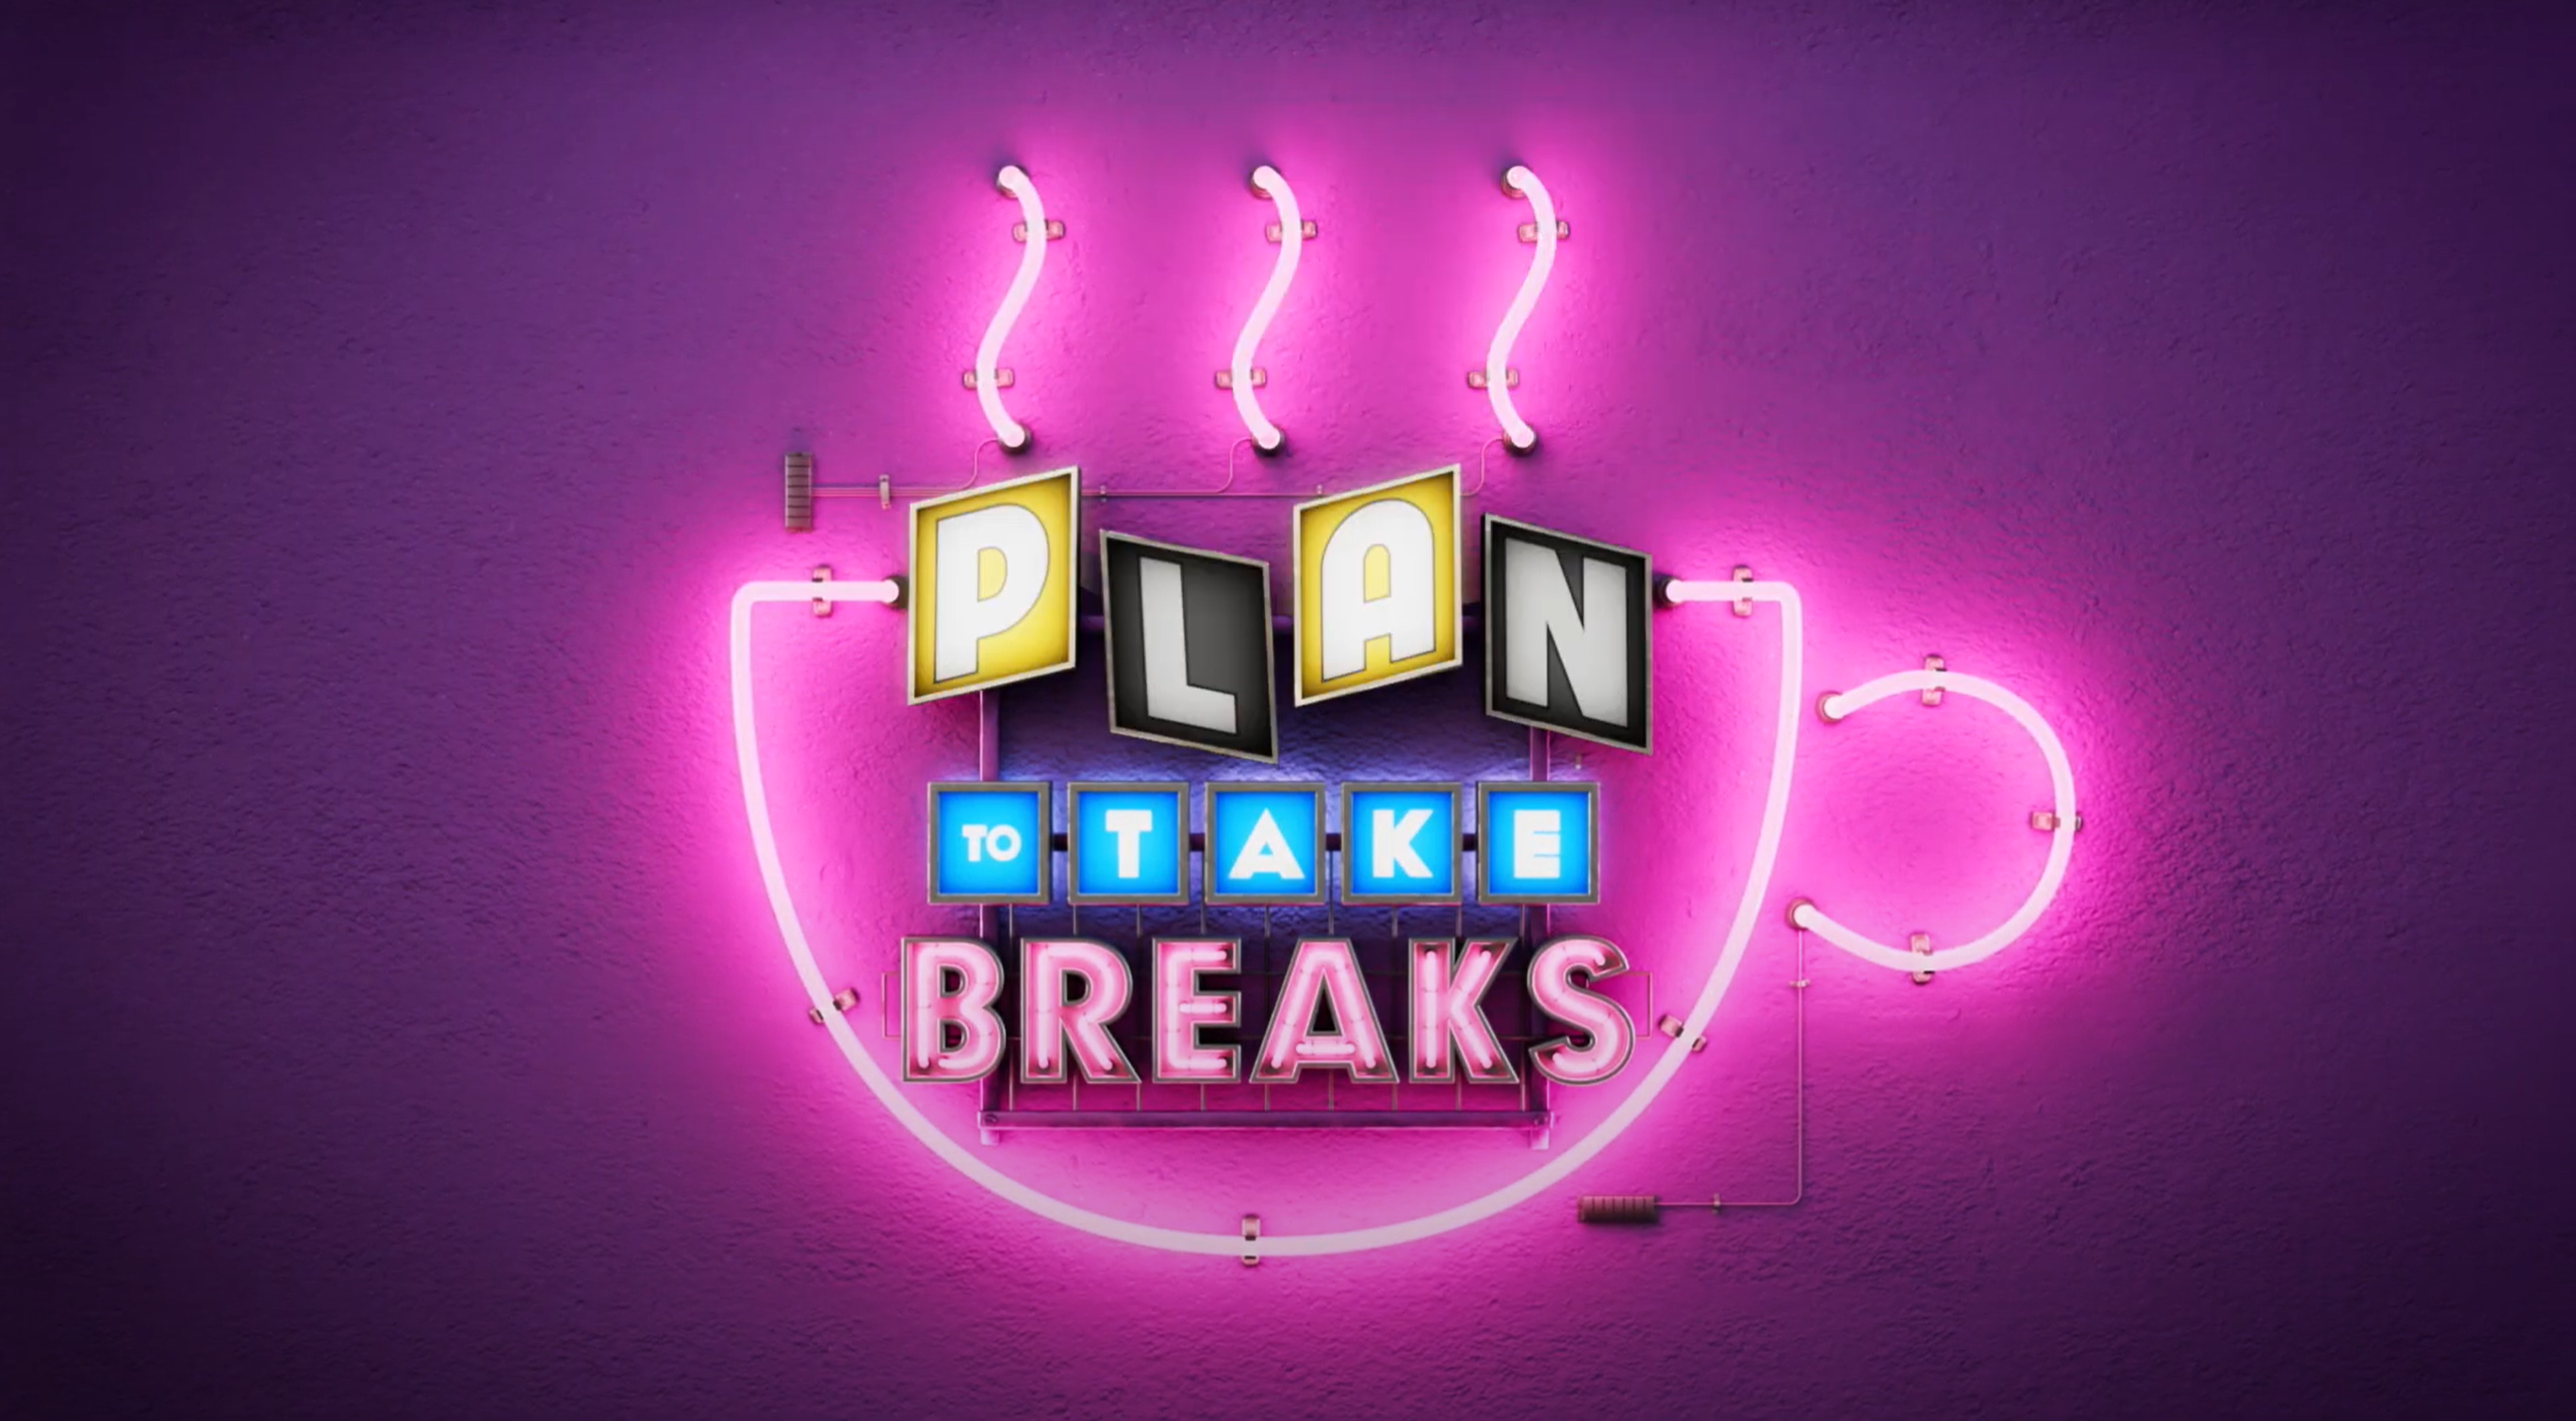 Screenshot from New York State Gambling Commission's new responsible gambling ad campaign: a neon light in the shape of a coffee cup with sign-styled letters that say "Plan to take Breaks", reminding gamblers that time away is important